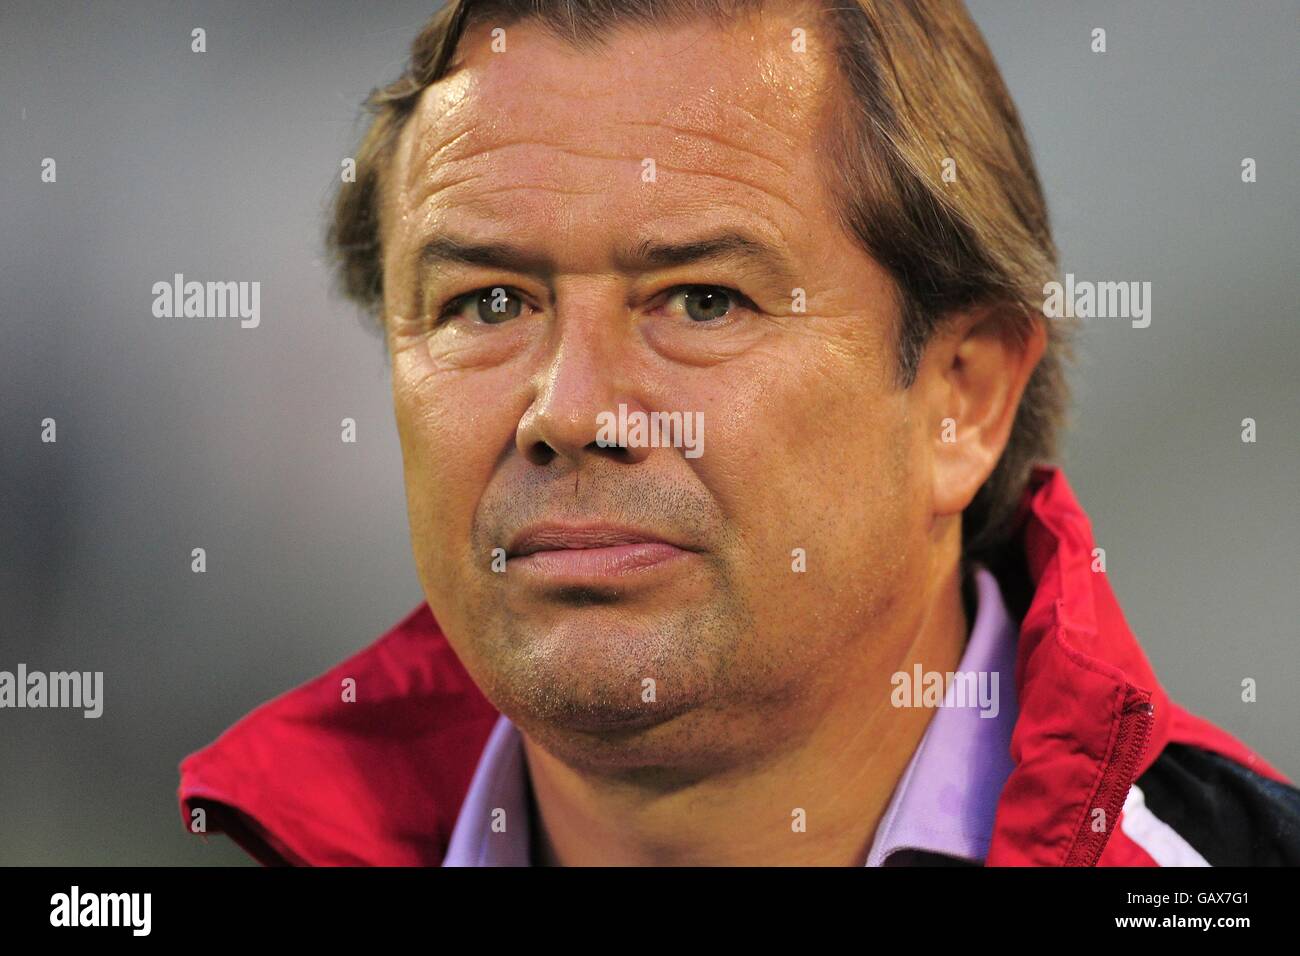 Orlando, FL, USA. 22nd June, 2012. Orlando City Lions coach Adrian Heath during the Lions 3-0 win over the Harrisburg City Islanders in their USL Pro game at the Citrus Bowl on June 22, 2012 in Orlando, Florida. ZUMA Press/Scott A. Miller © Scott A. Miller/ZUMA Wire/Alamy Live News Stock Photo